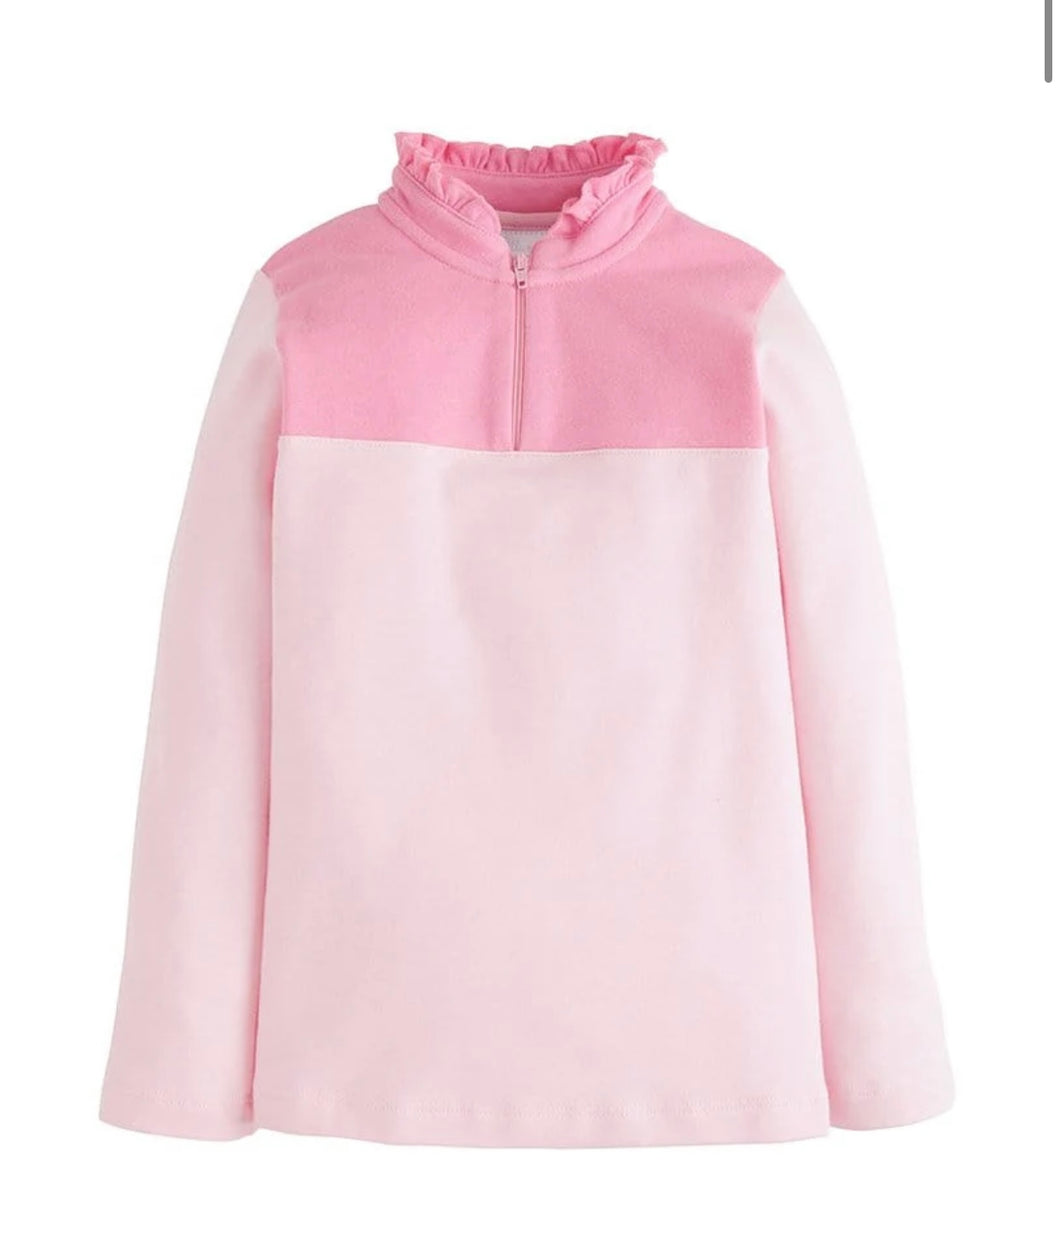 Little English Hastings Half Zip - Available in Pink or Blue